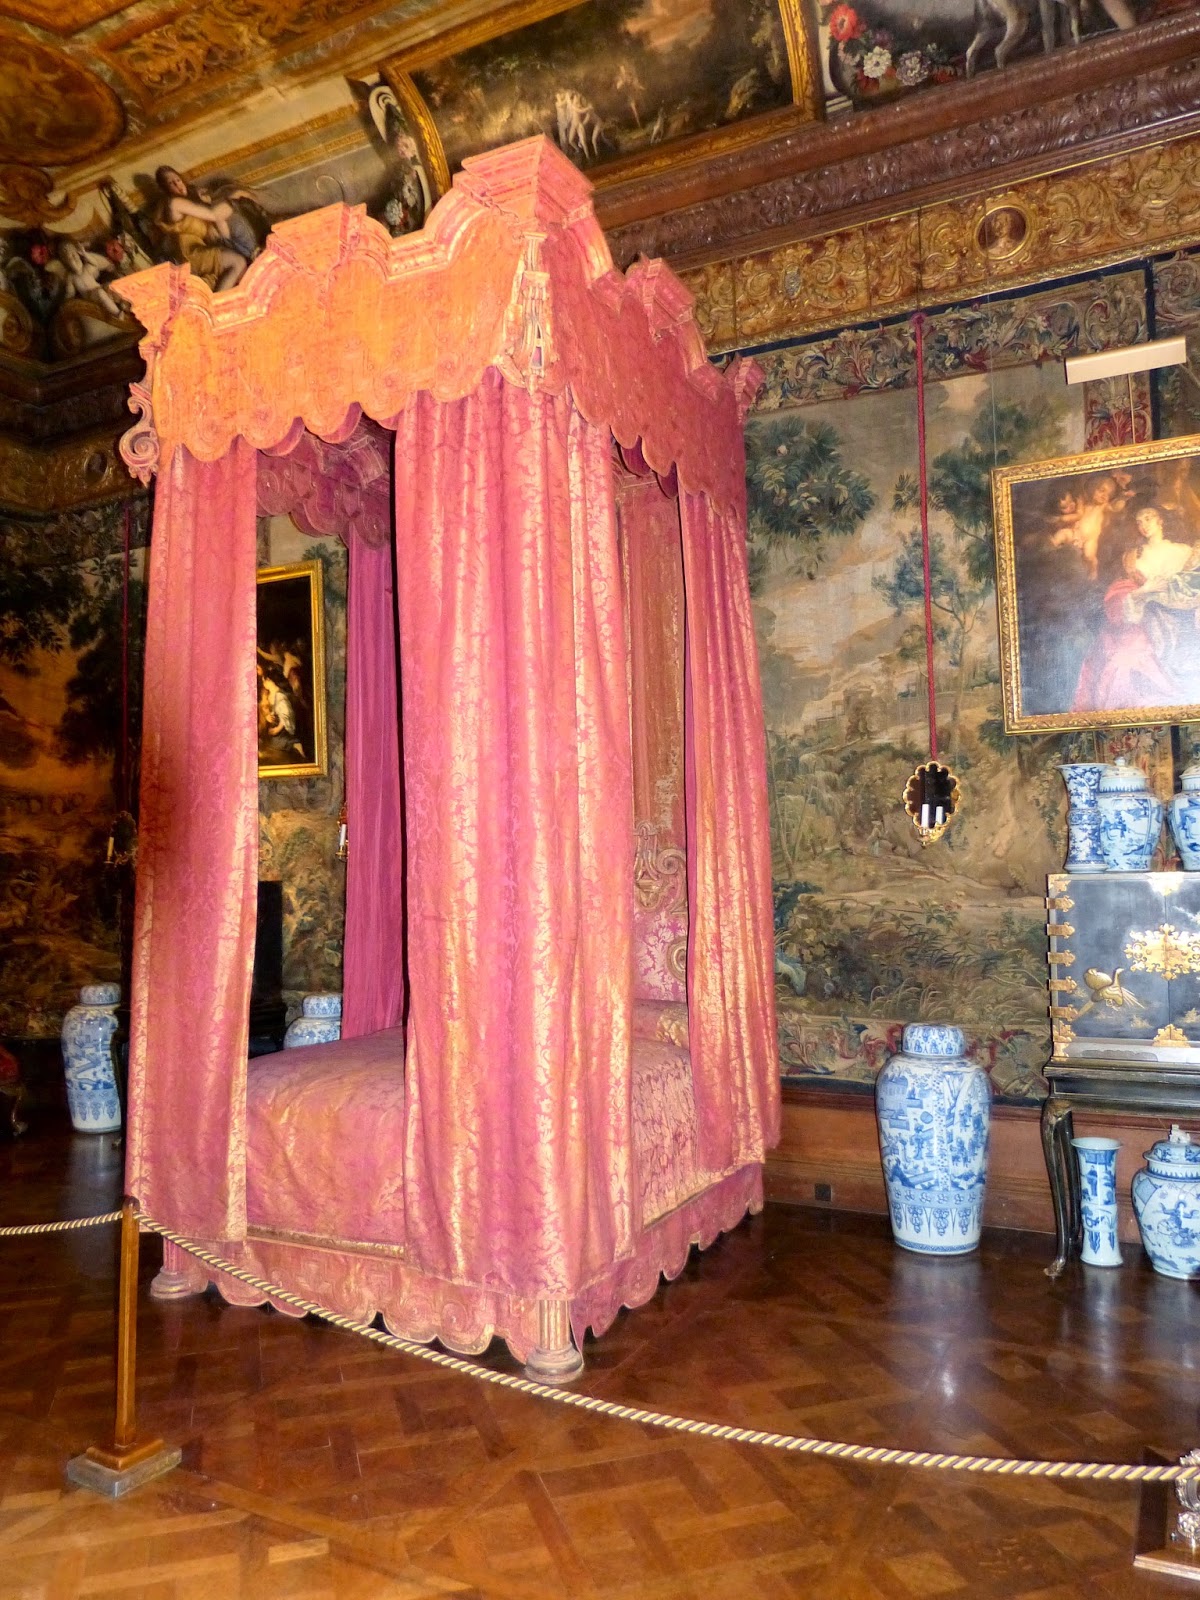 The State Bedroom, Chatsworth